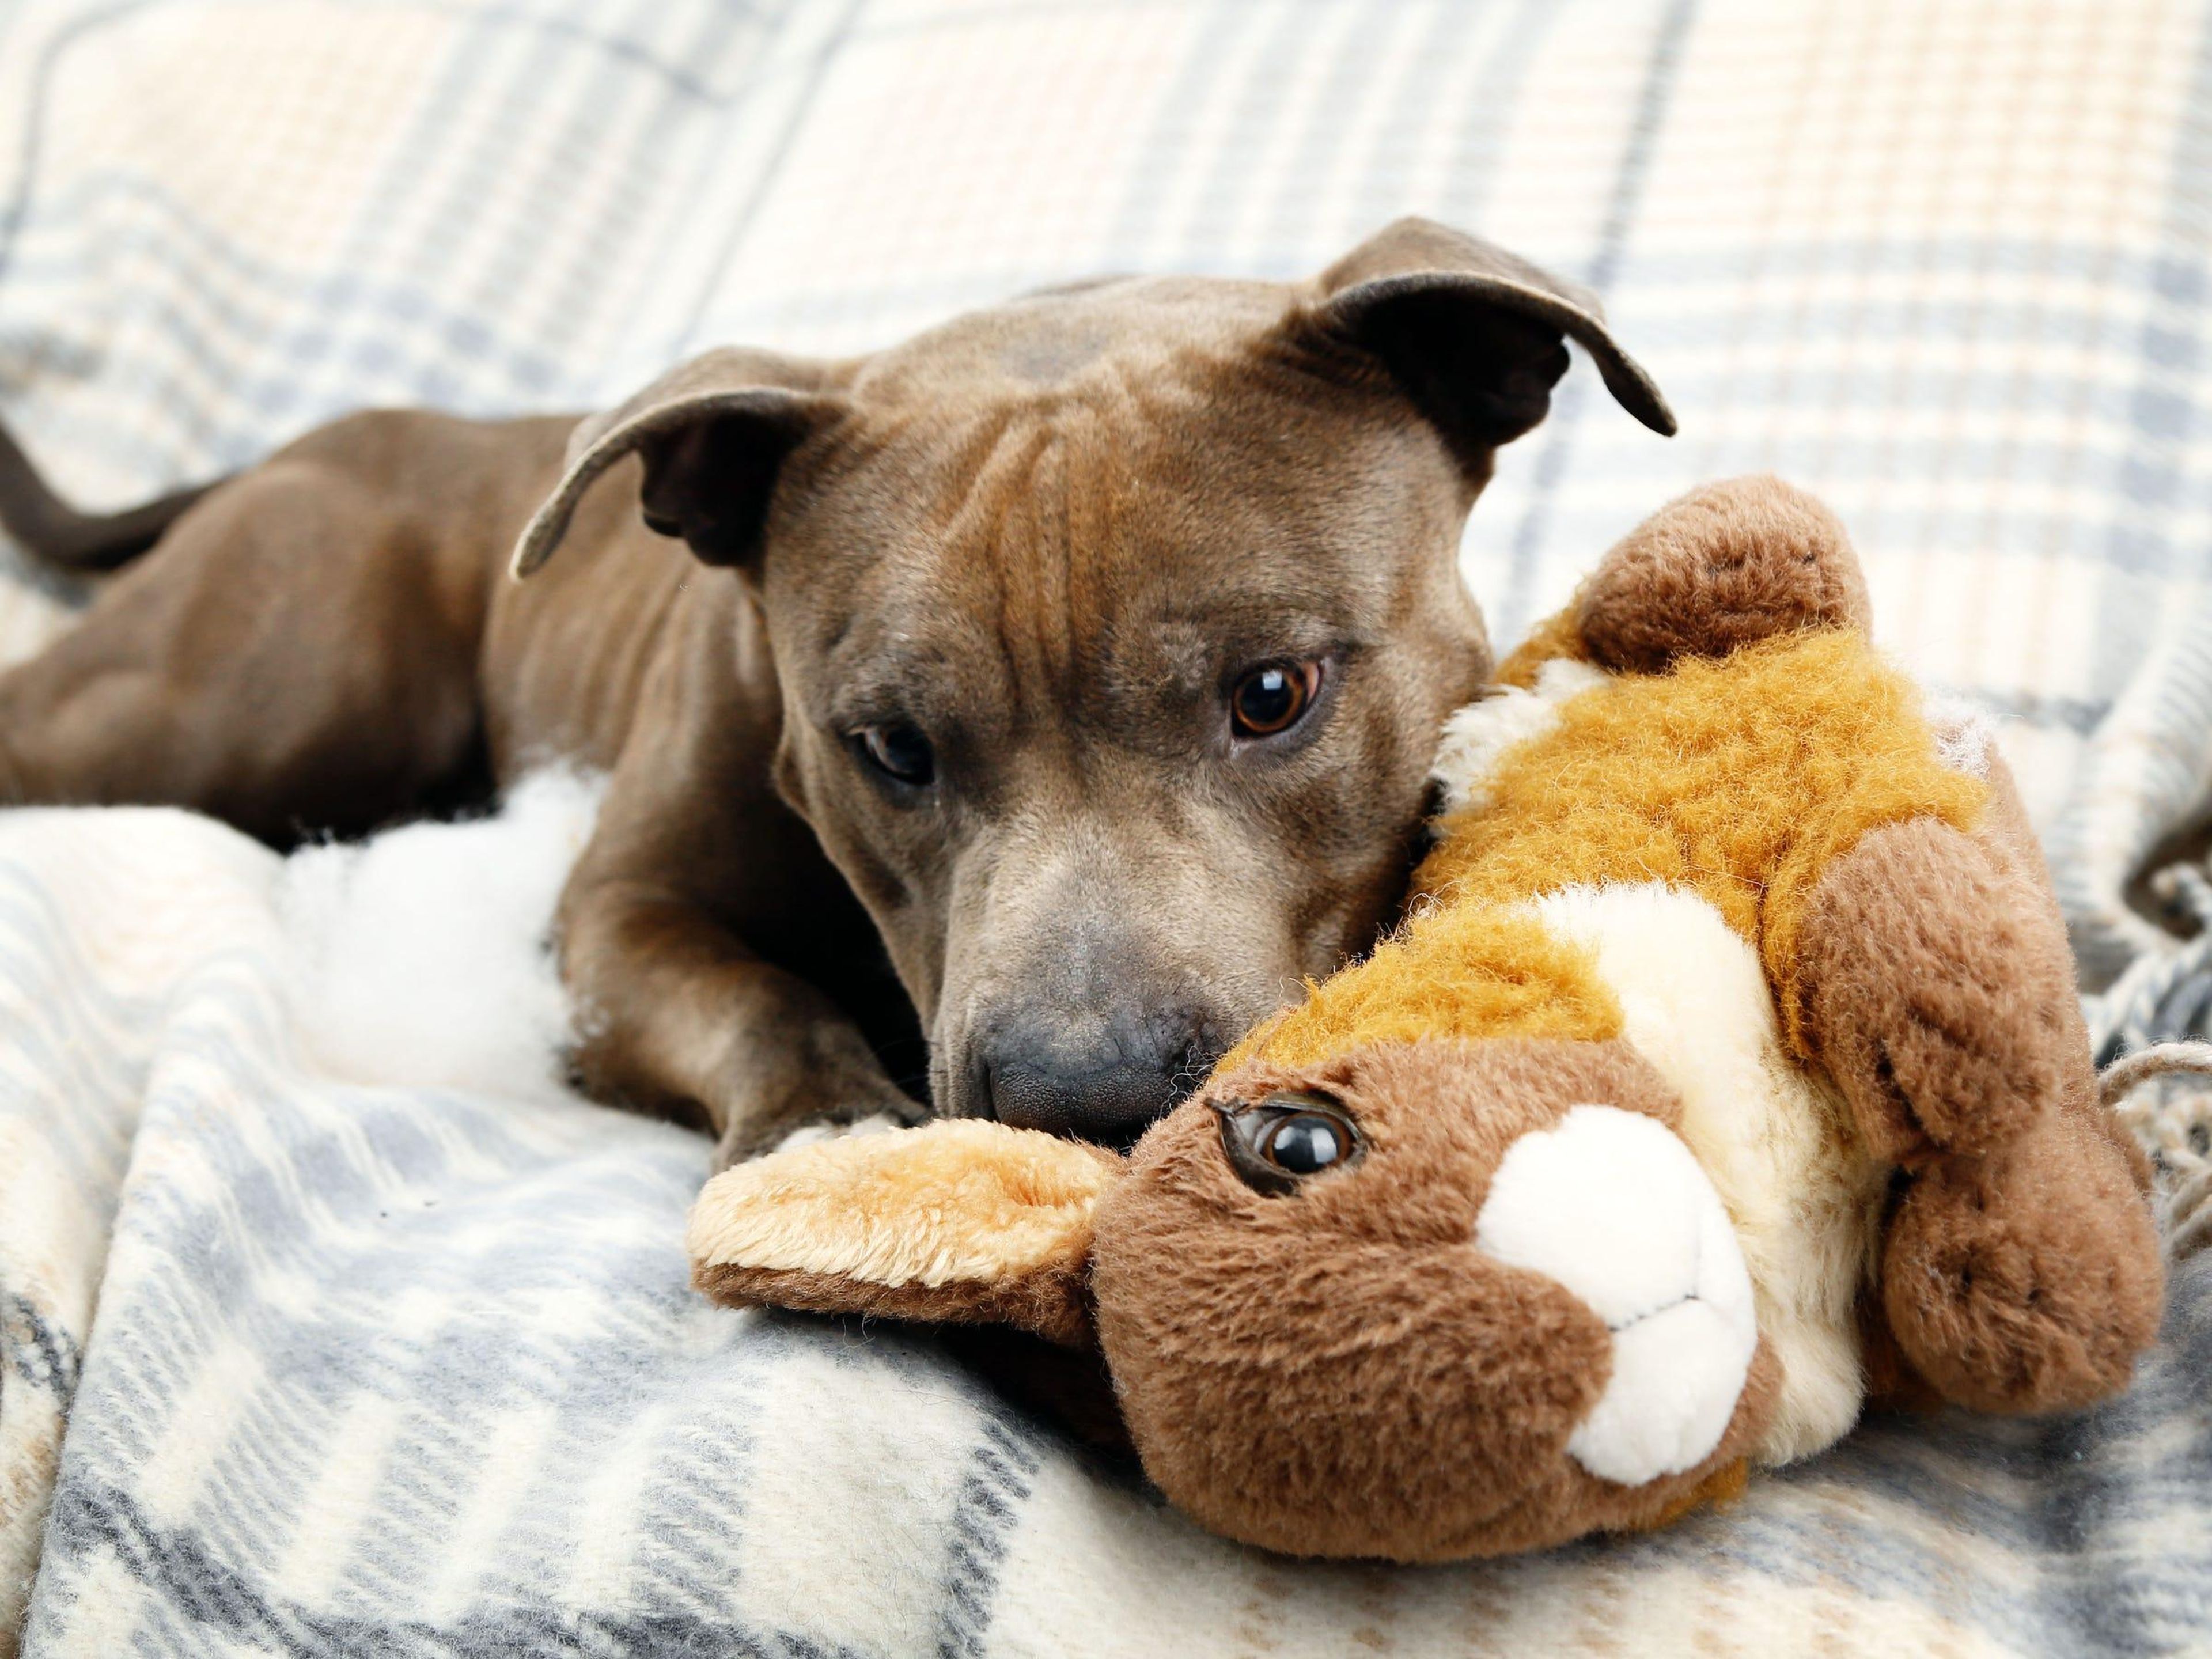 Those who live in small spaces with active animals should use extra-stimulating pet toys.